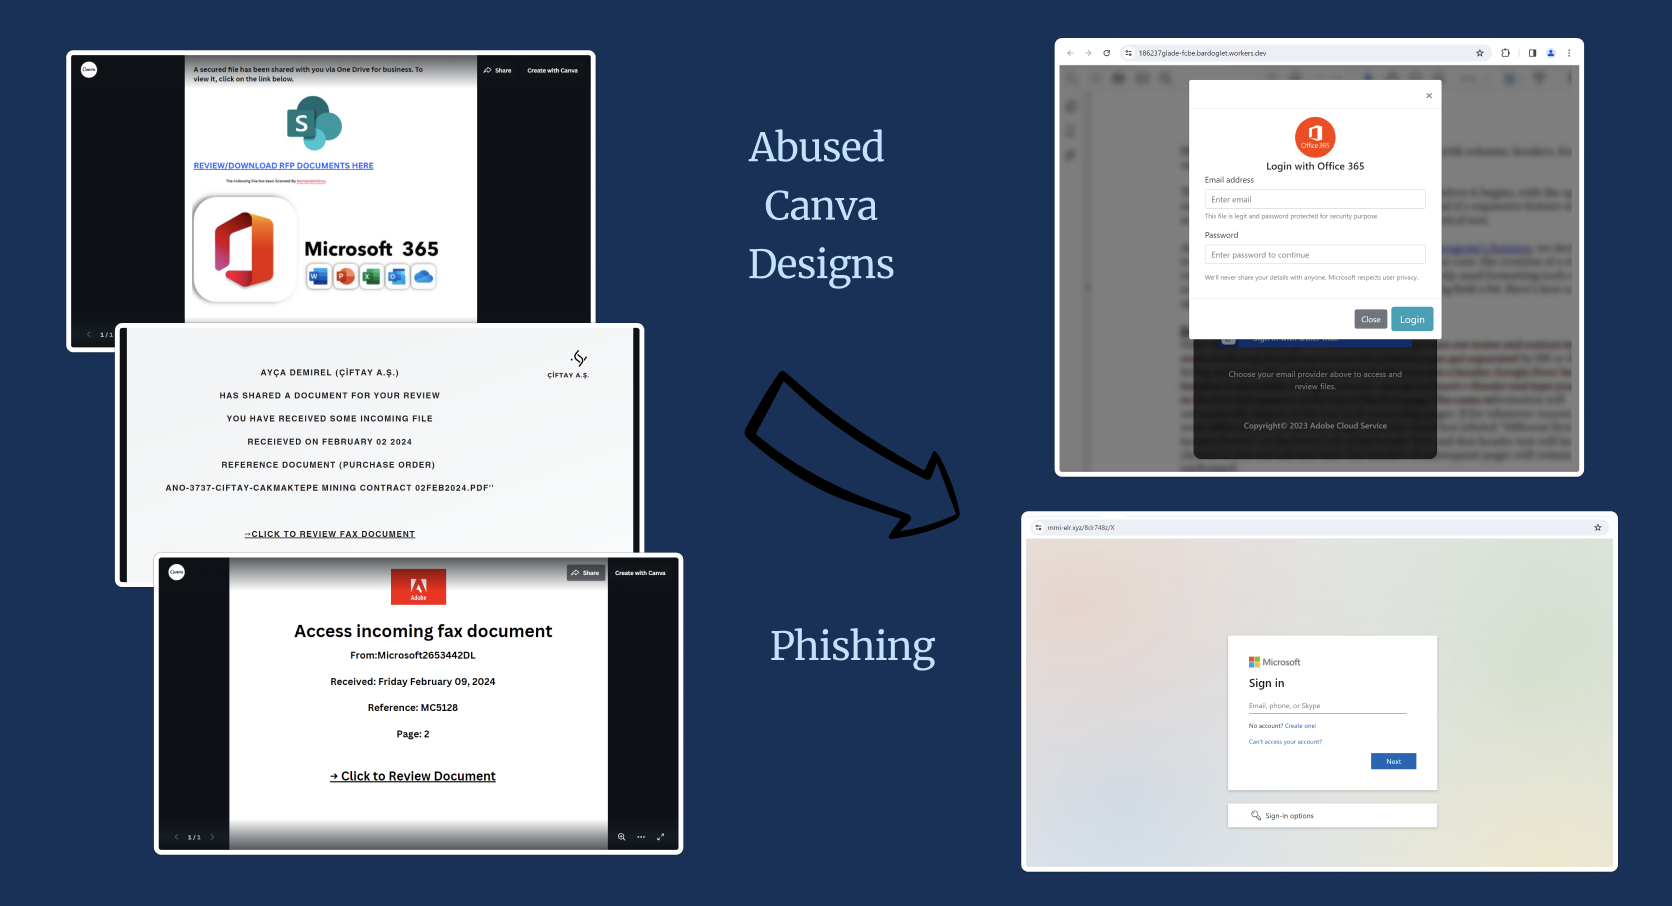 Examples of abused Canva designs and of final phishing pages.